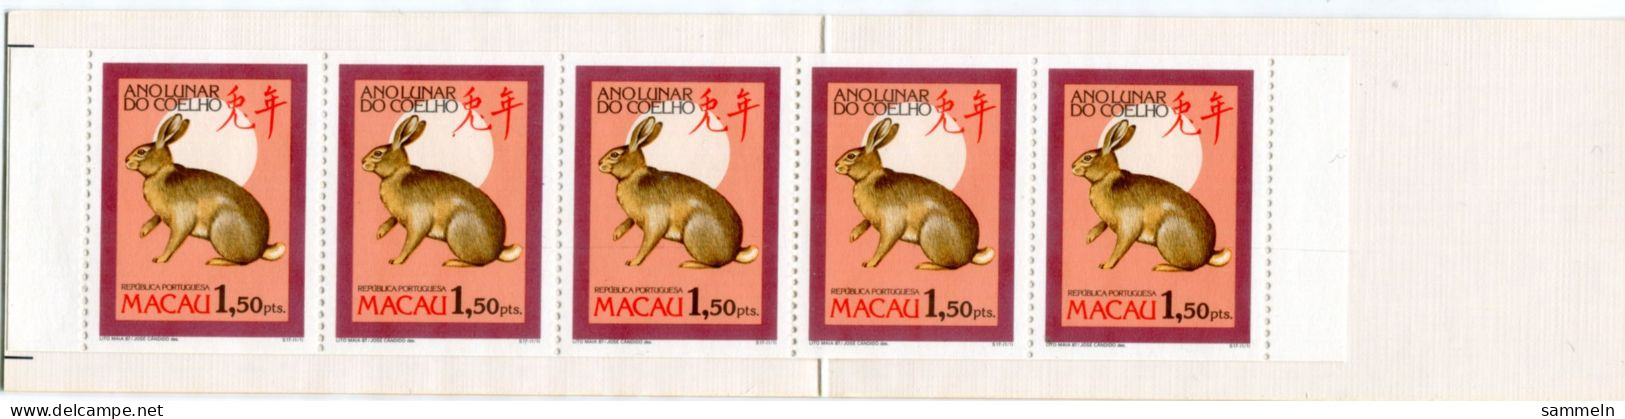 MACAO 568 C MH Mnh - Chinesisches Jahr Des Kaninchens, Chinese Year Of The Rabbit, Année Chinoise Du Lapin - MACAU - Cuadernillos